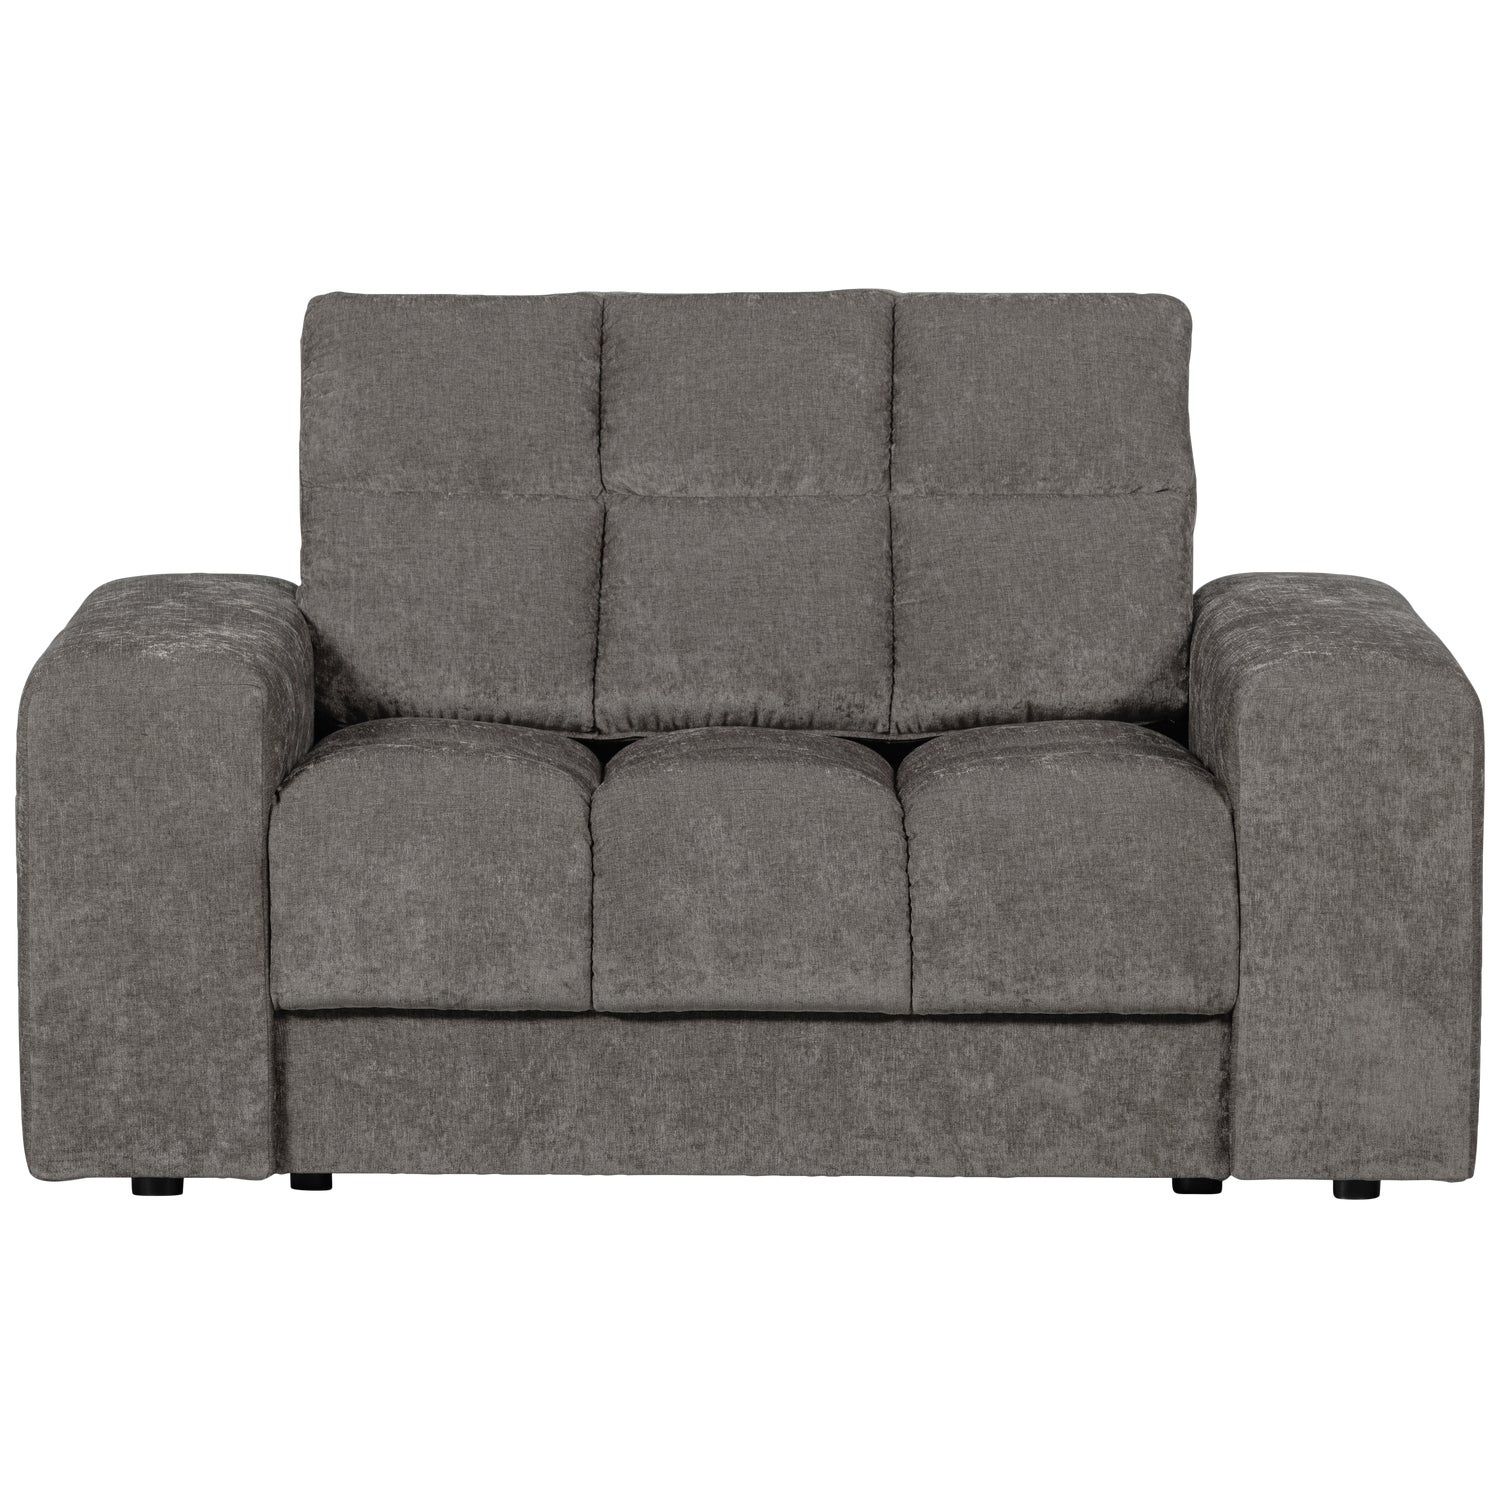 379006-M-01_VS_WE_Second_date_loveseat_vintage_mouse.png?auto=webp&format=png&width=1500&height=1500